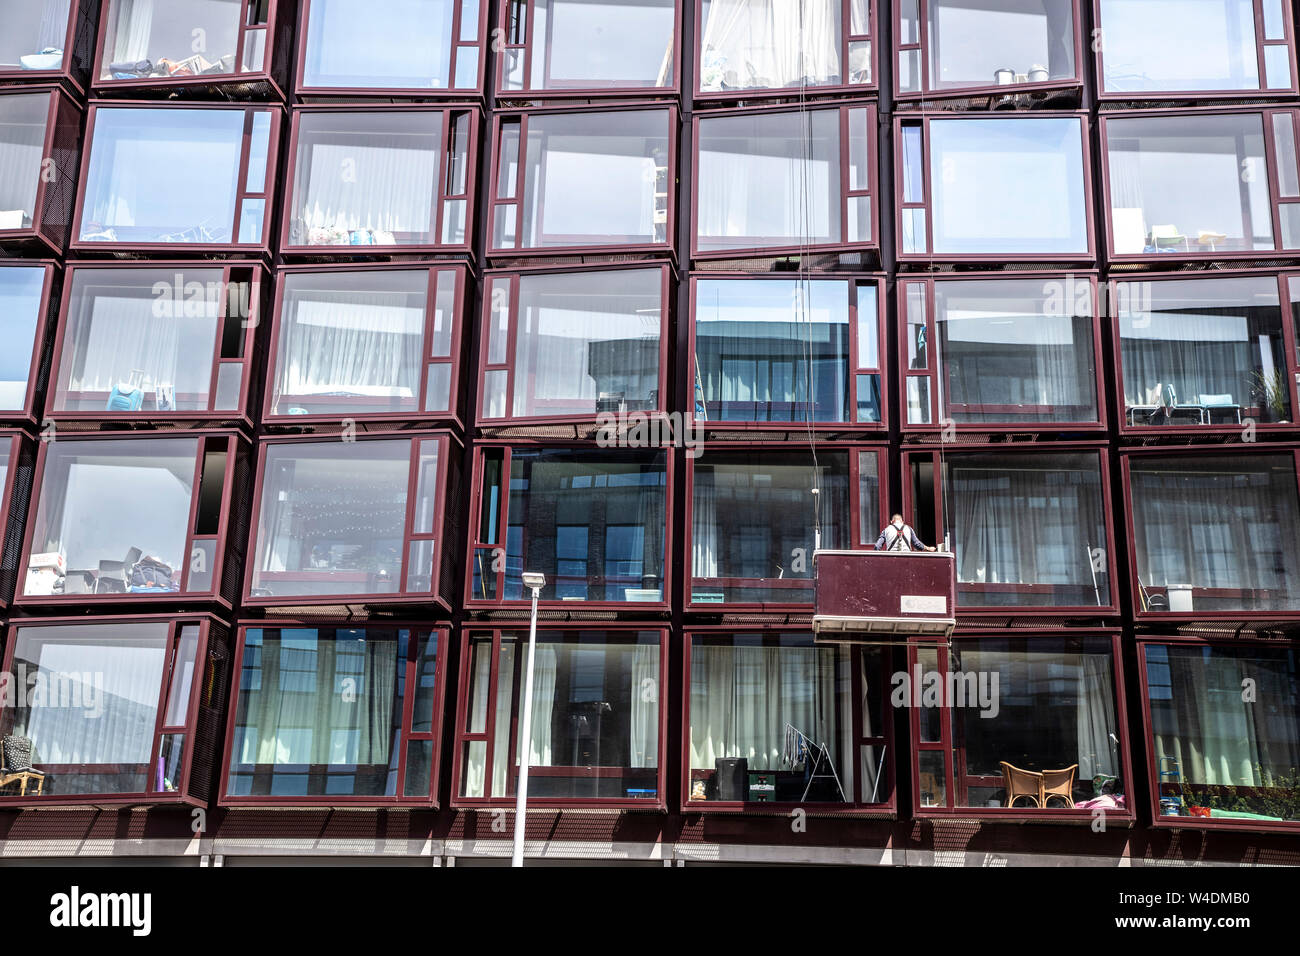 Amsterdam, Netherlands, residential house at NDSM Werf, large window facades, conservatories, window cleaners, Stock Photo